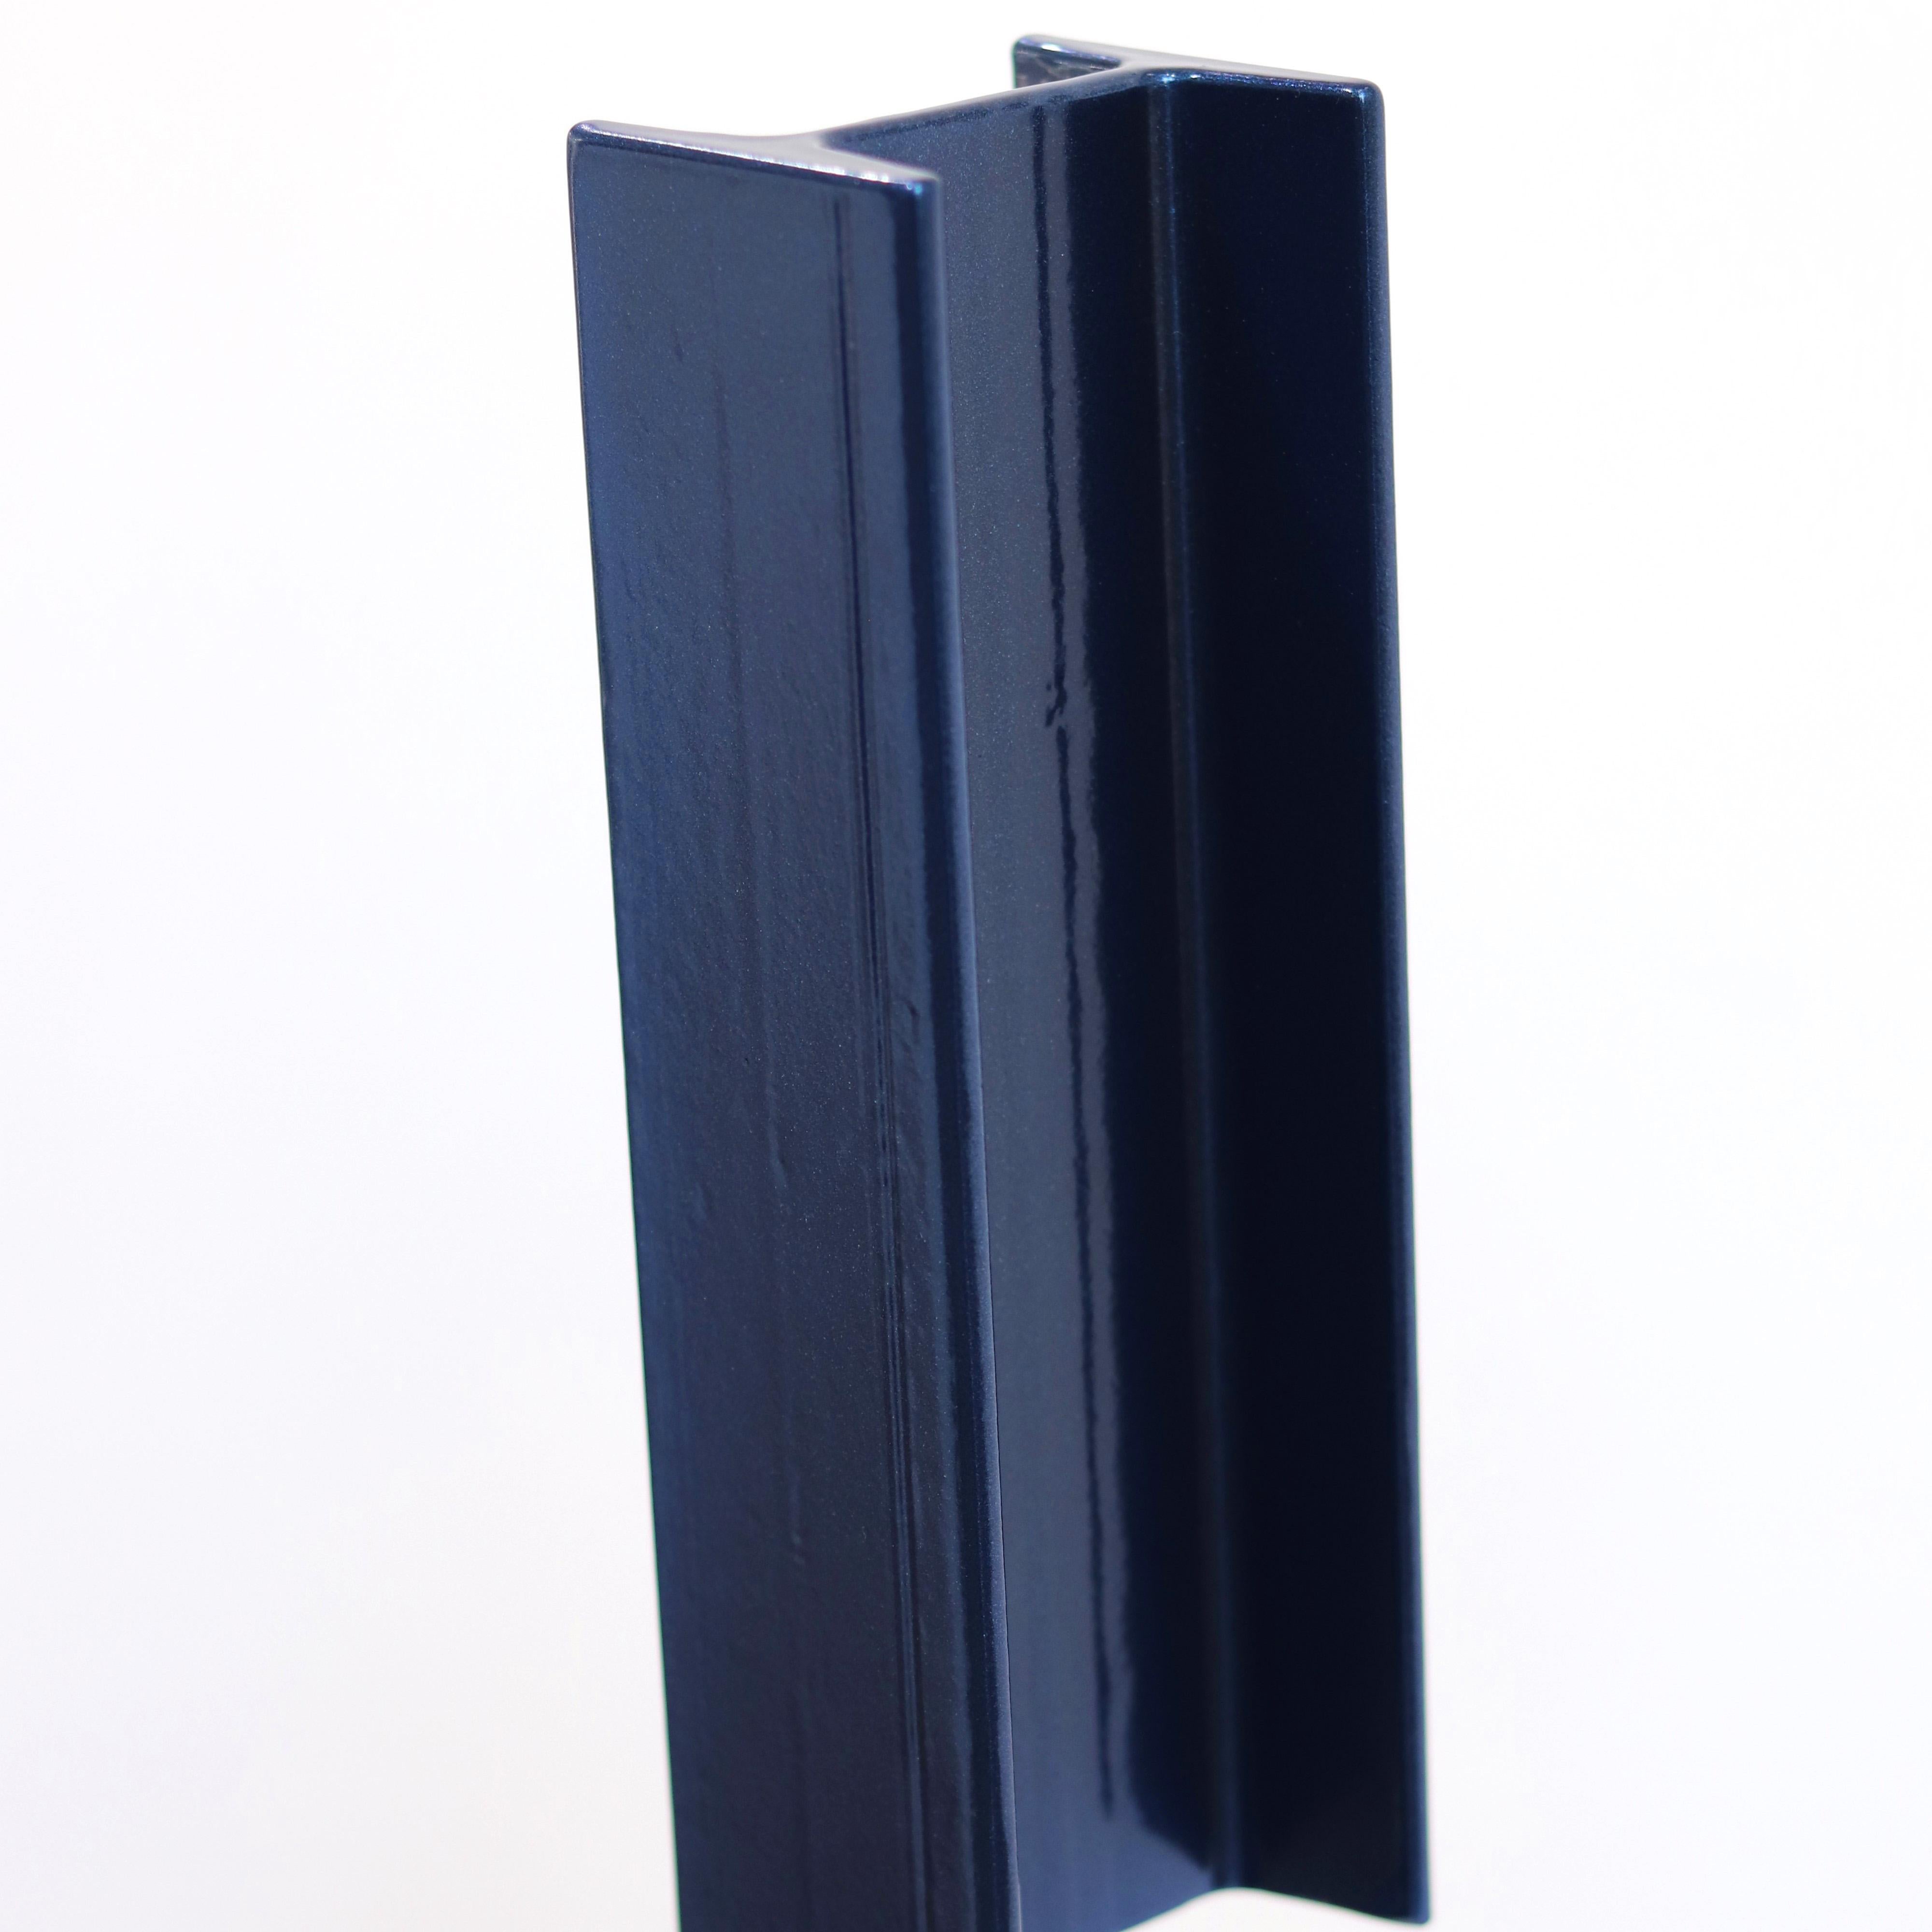 Oh So Blue - Tall Modern Large Contemporary Abstract Minimalism Steel Sculpture - Black Abstract Sculpture by Granville Beals